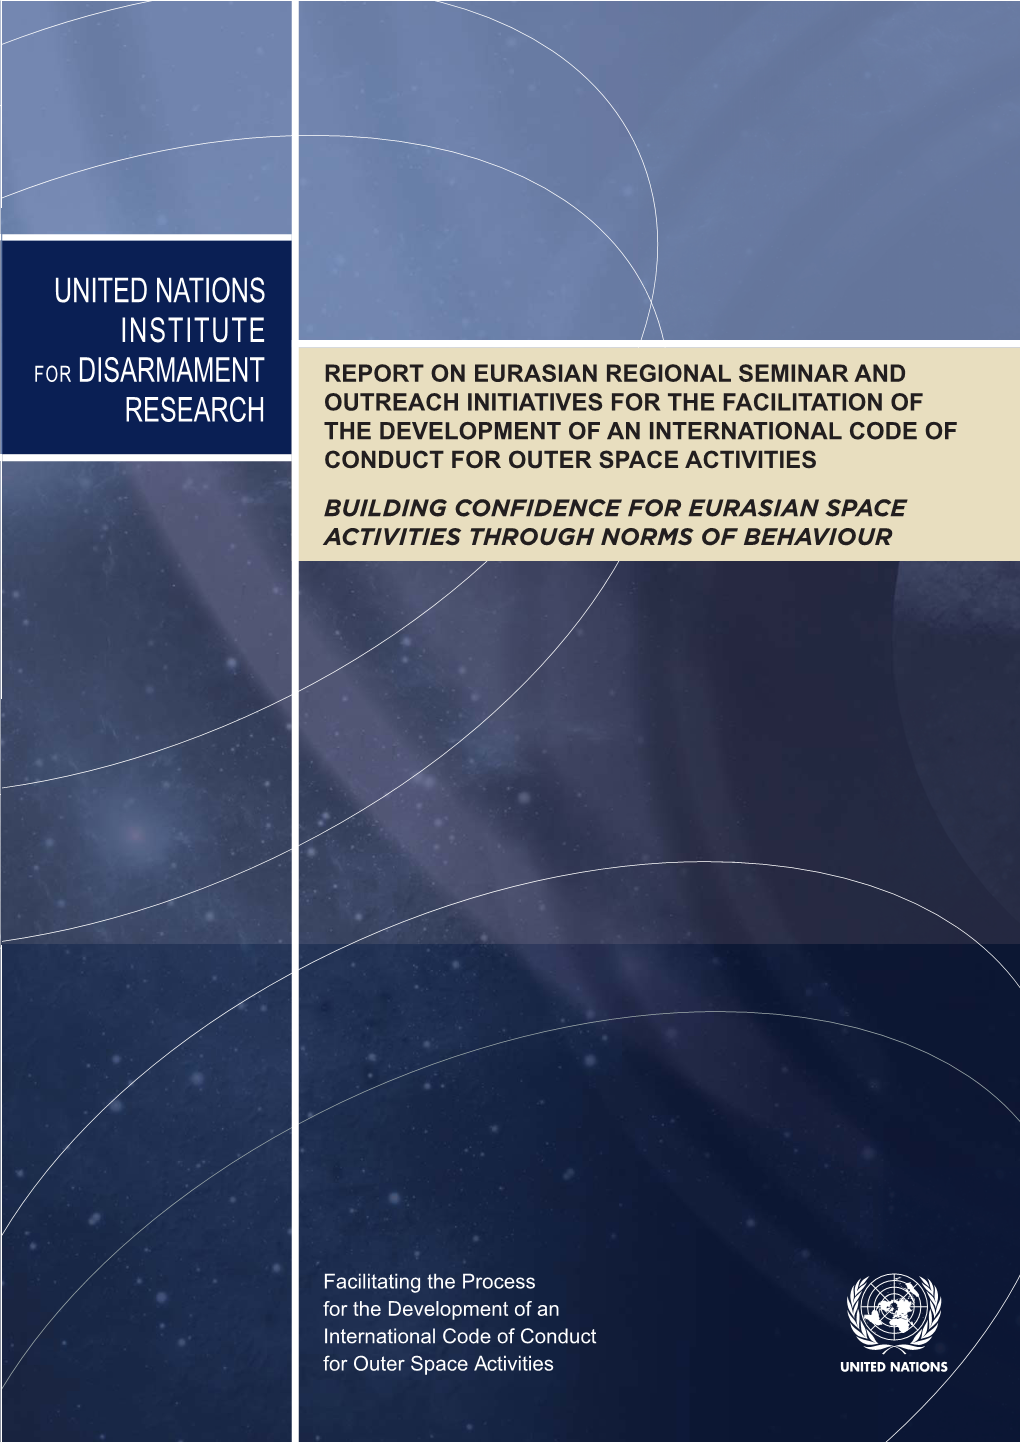 United Nations Institute for Disarmament Research (UNIDIR)—An Autonomous Institute Within the United Nations— Conducts Research on Disarmament and Security